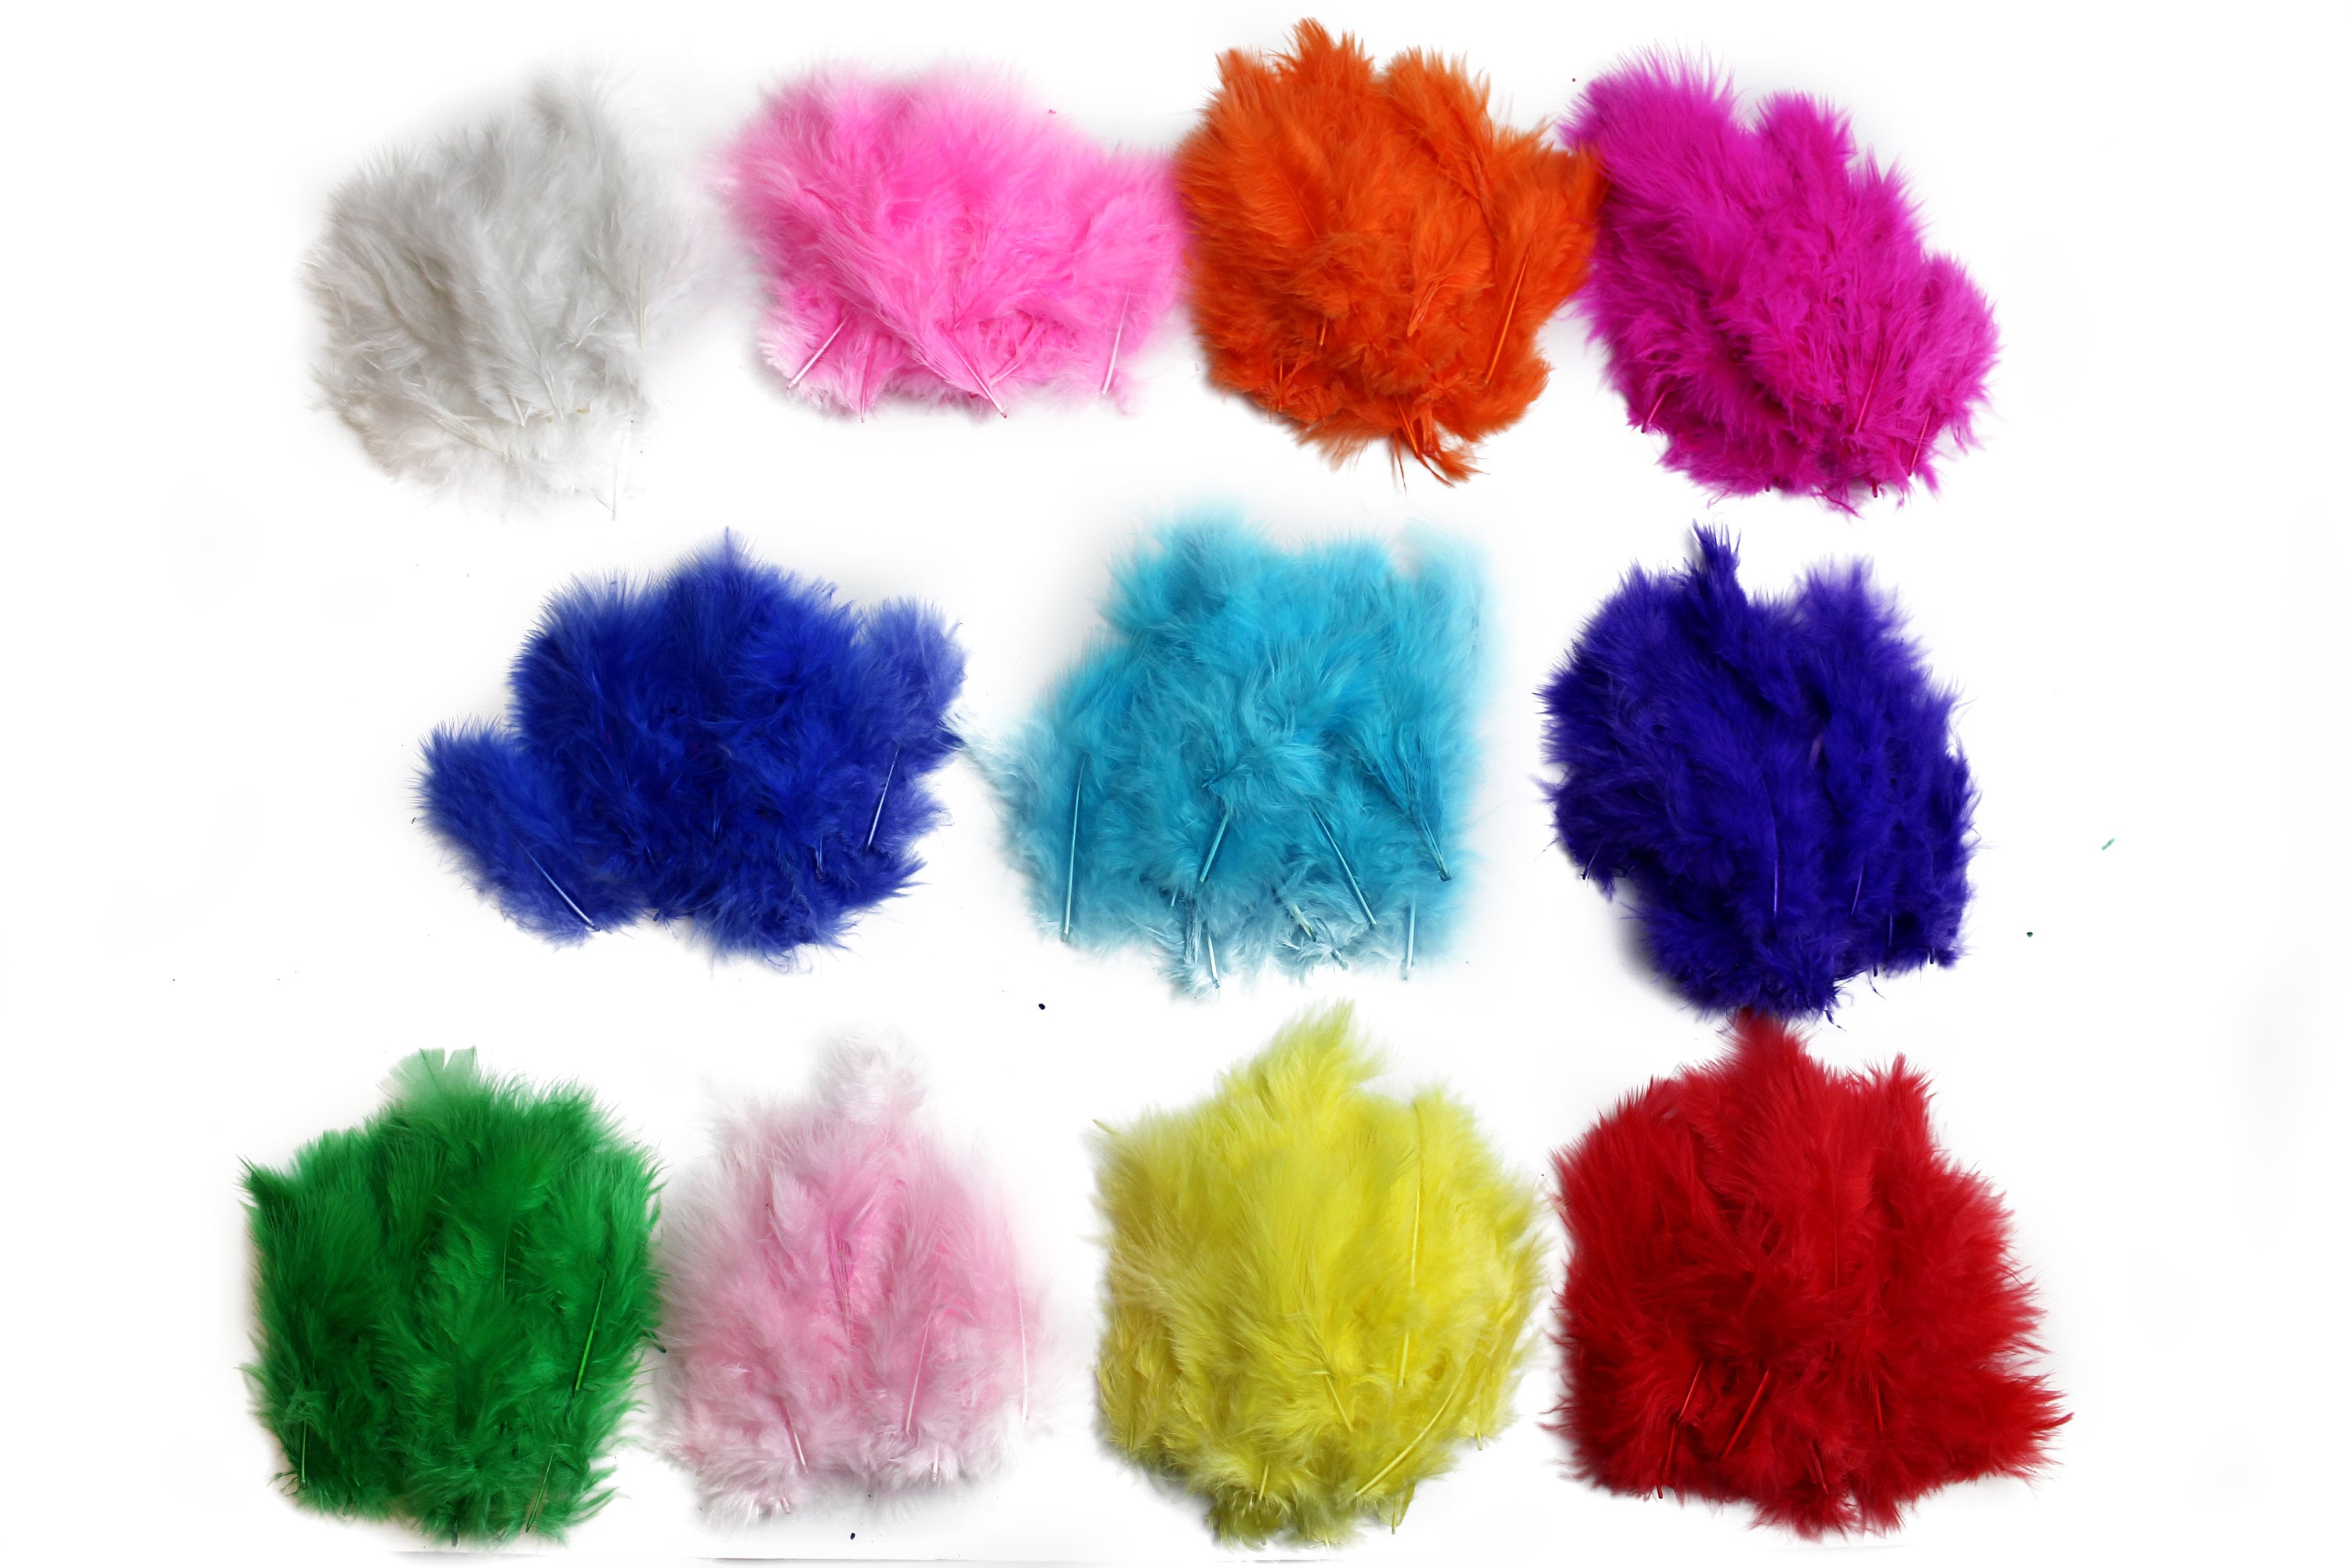 100pcs 4-6 Black Feathers for Crafts and Dreamcatcher Making, Fringe Trim  and DIY Projects, Colored Feathers Material